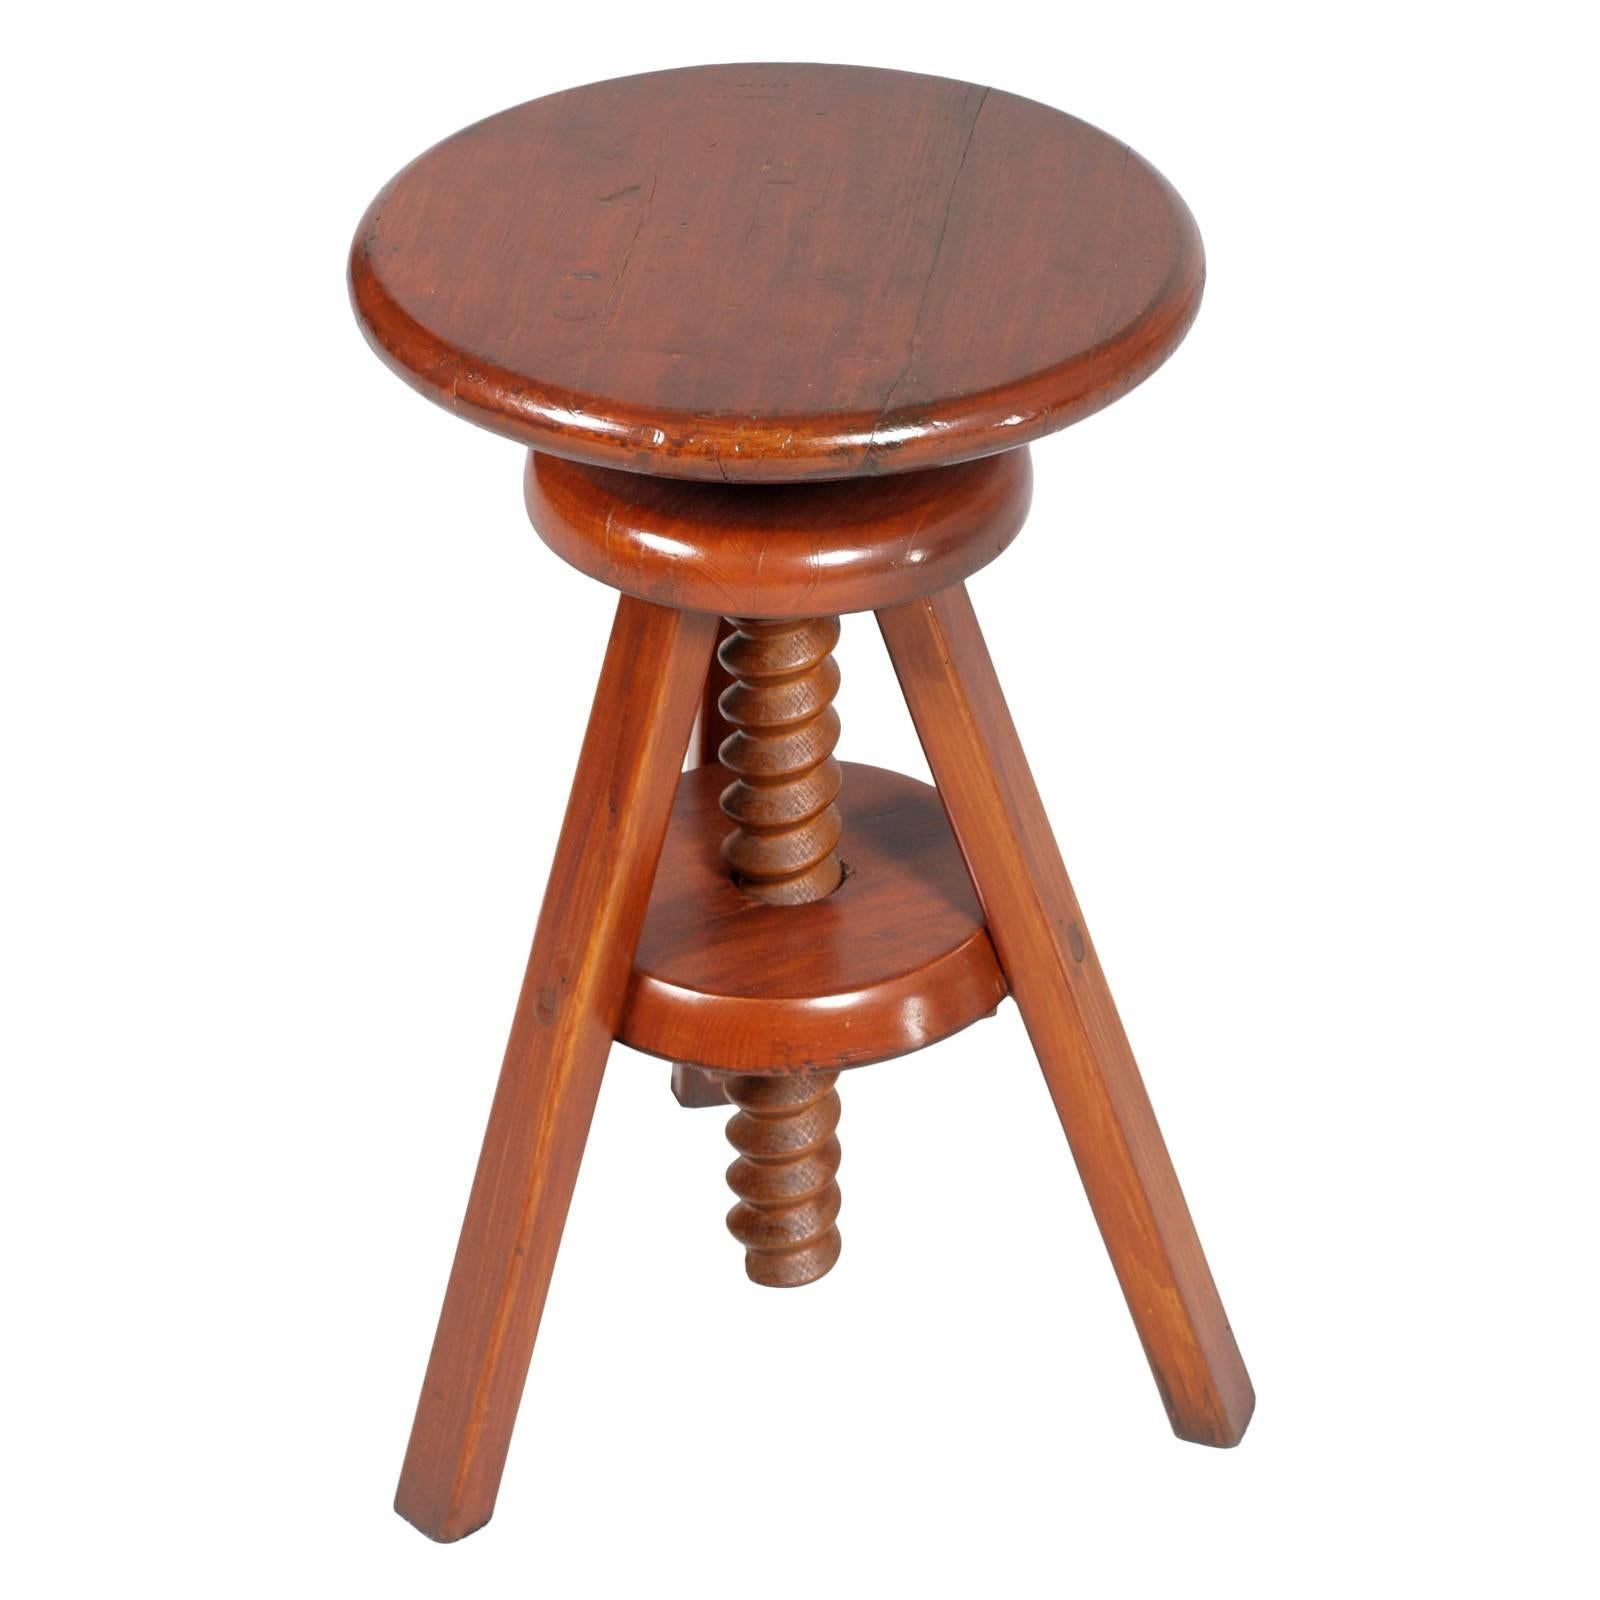 Mid-20th Century Tyrolean Adjustable Tripod Stool, in Red Larch Polished to Wax